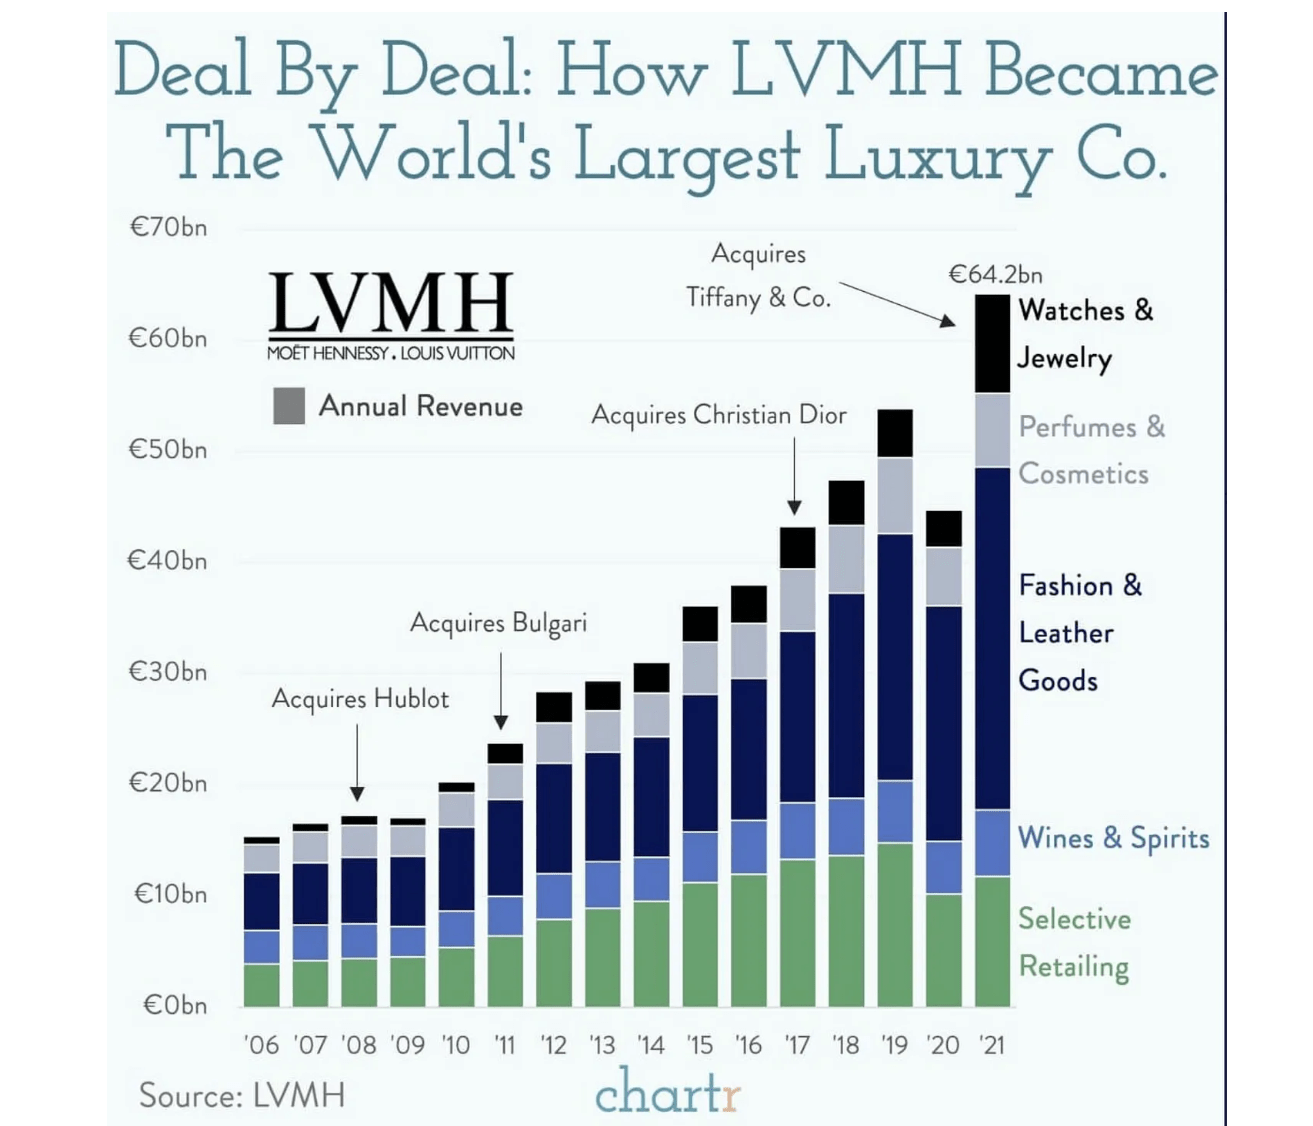 LVMH Stock: Great Investment, But Not At Today's Valuation (OTCMKTS:LVMHF)